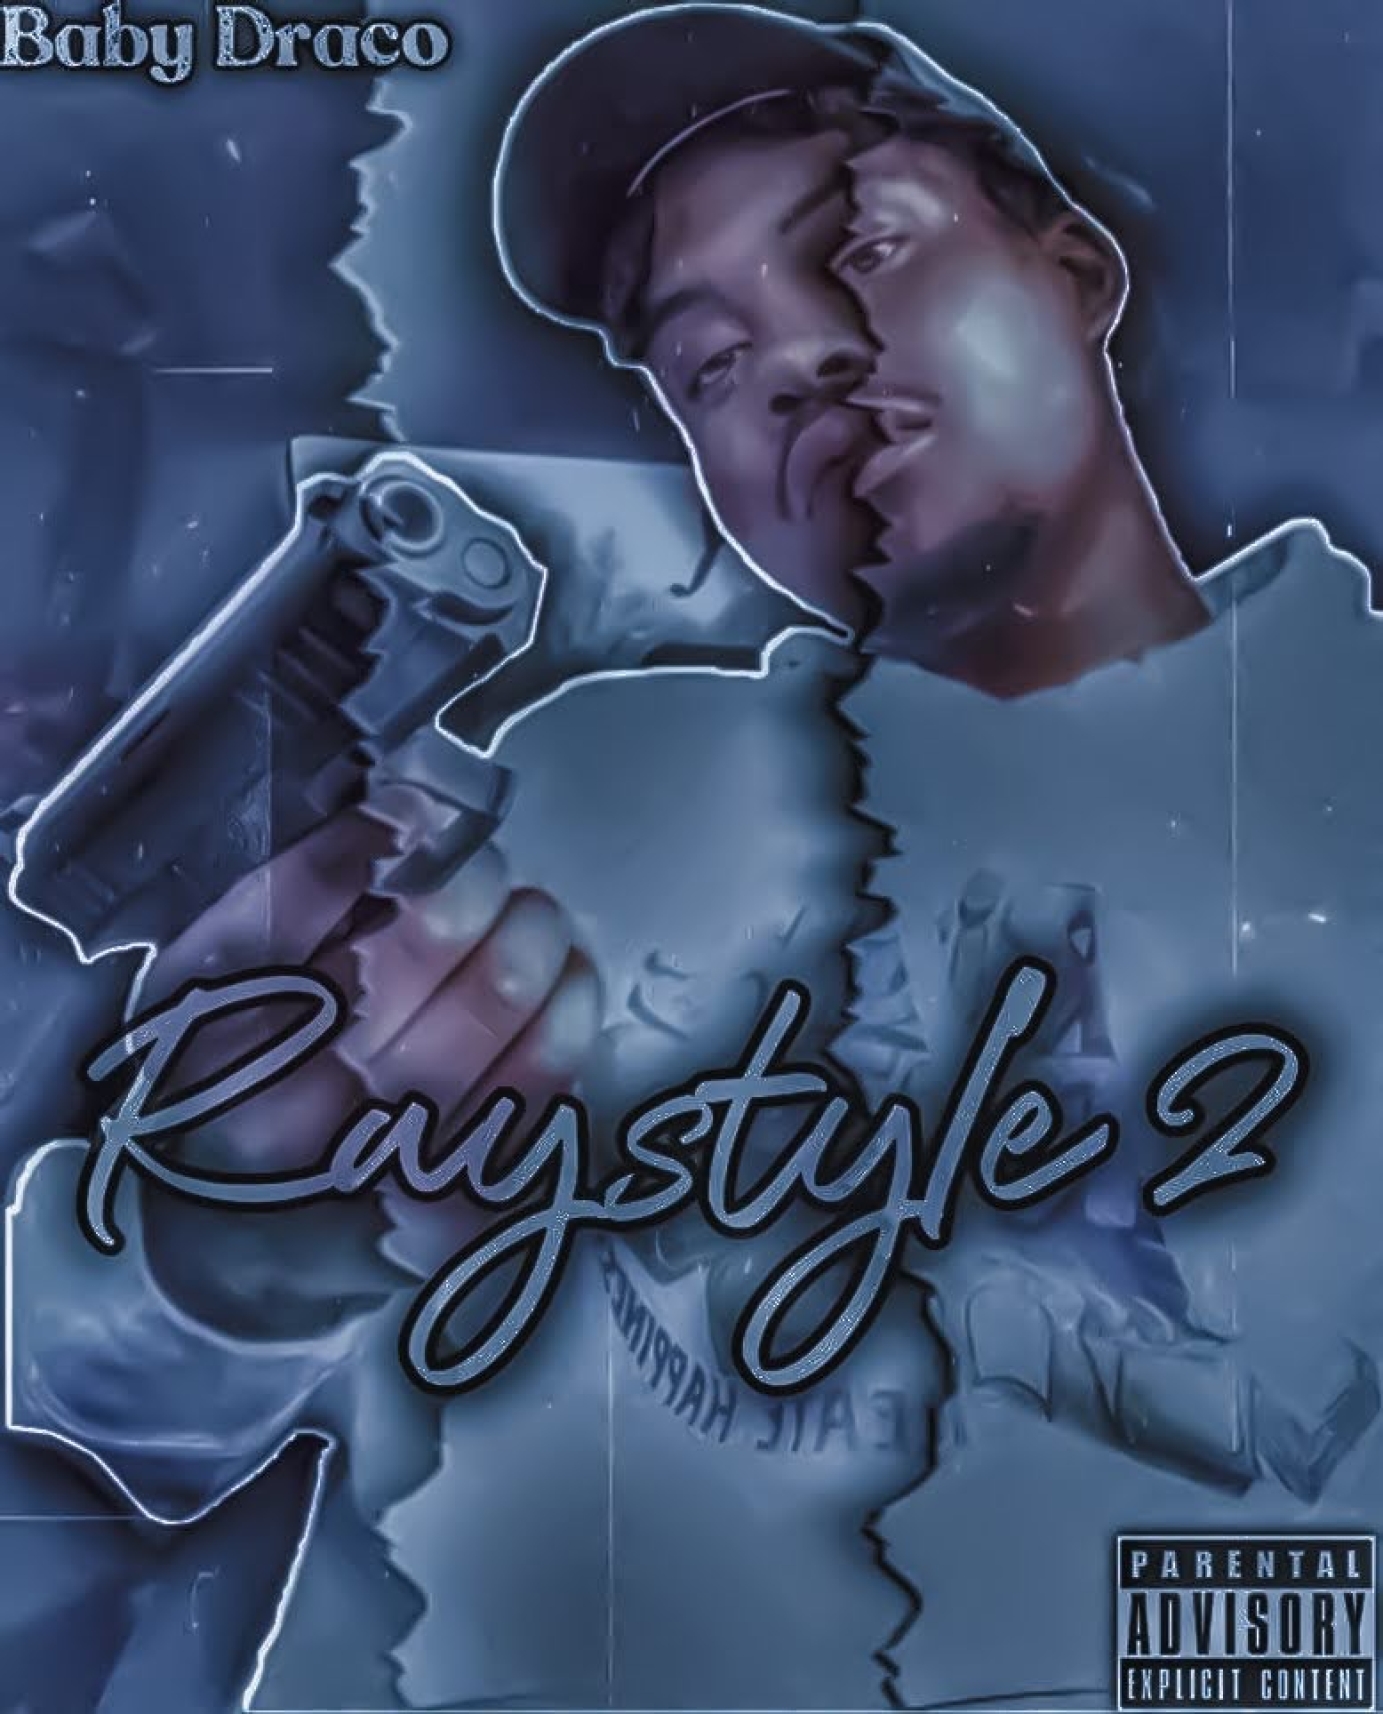 Baby Draco - Raystyle 2 (Album Cover)